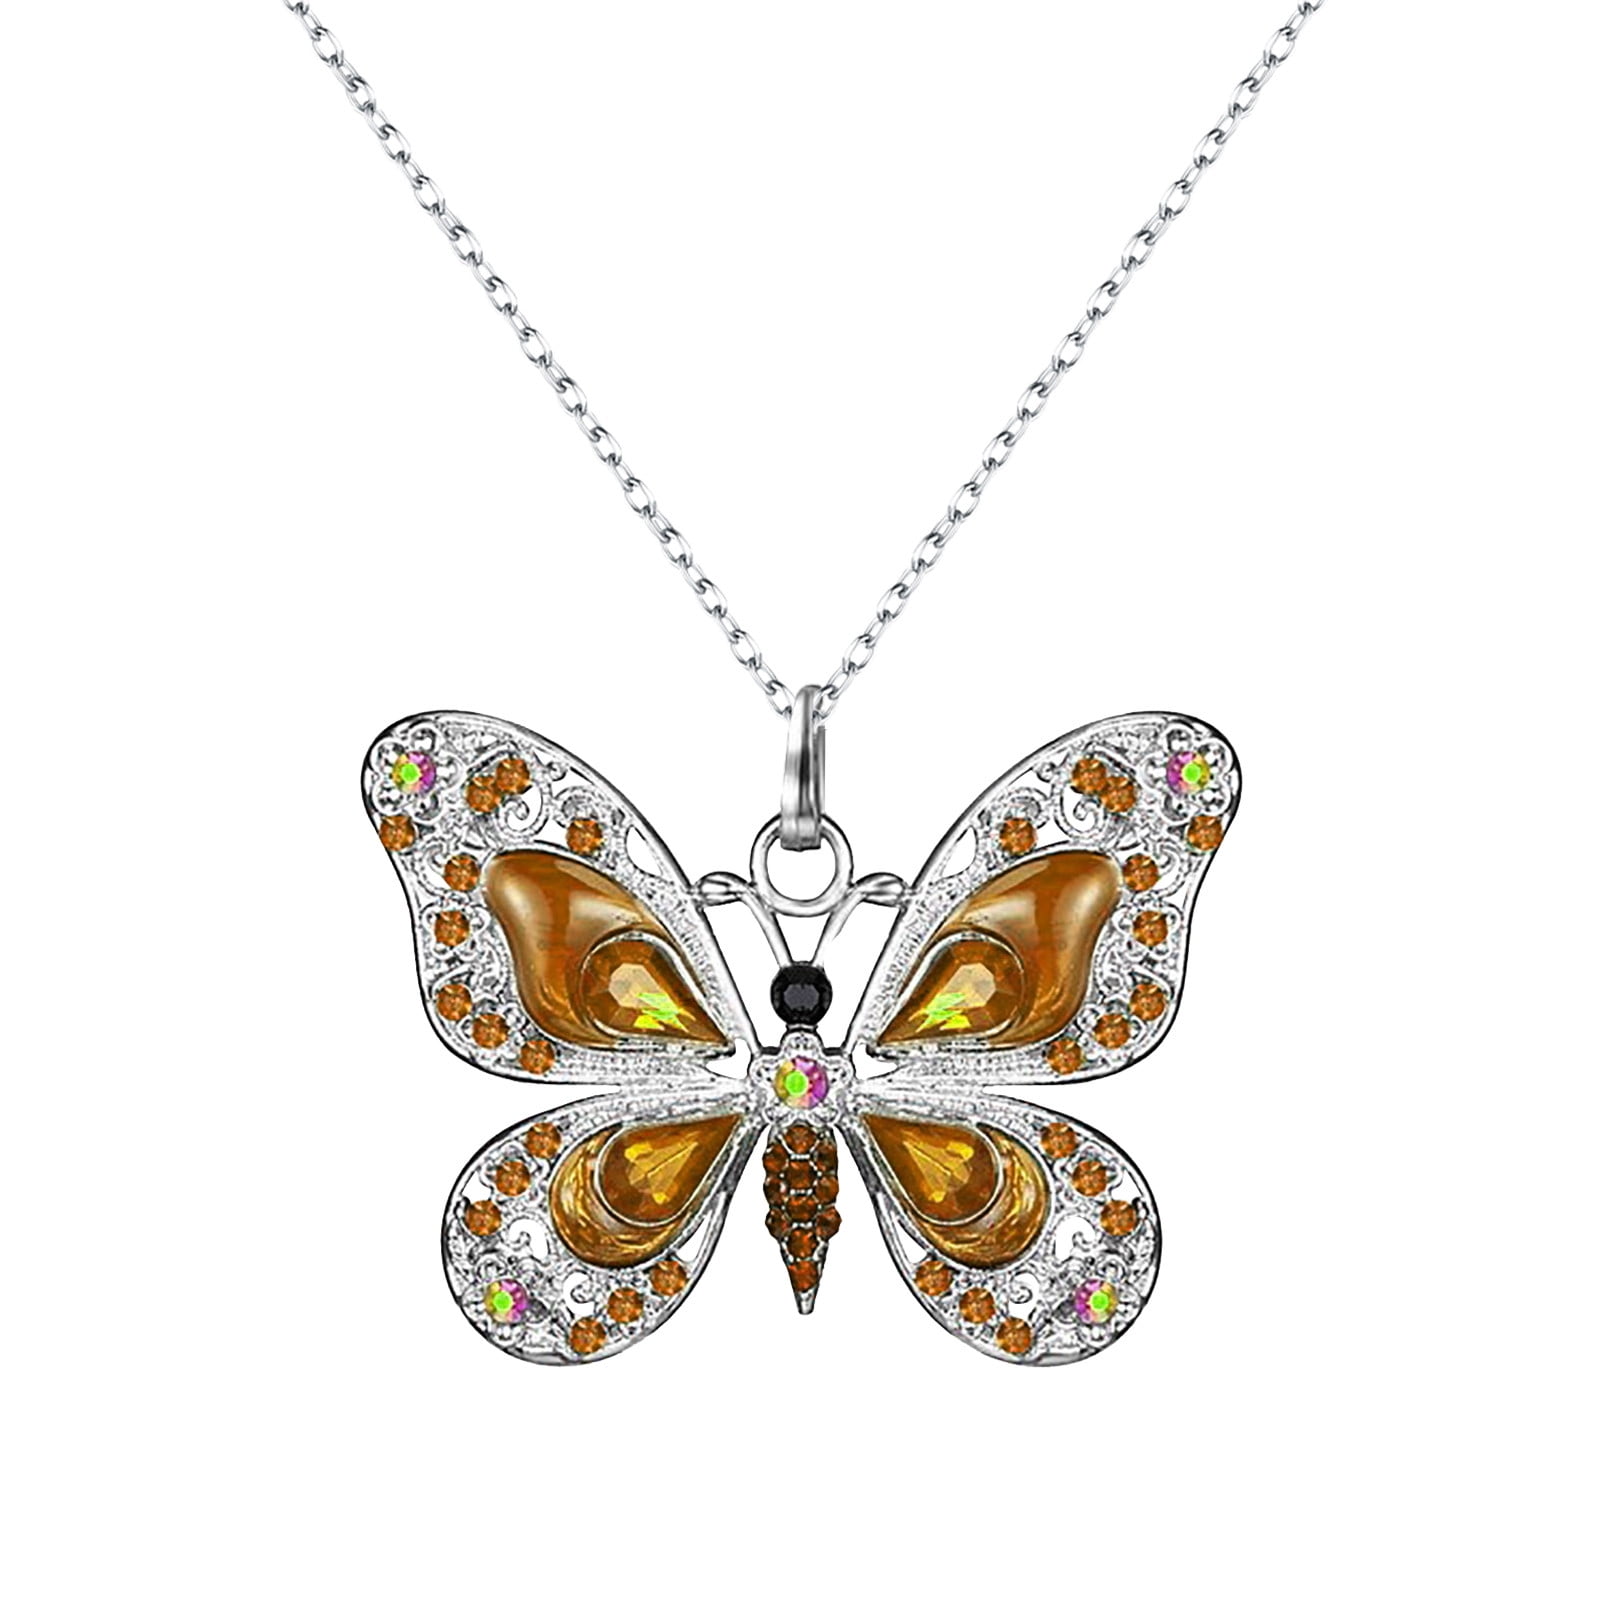 Heiheiup Personality Vintage Multicolor Butterfly Necklace For Women  Jewelry Gifts Bulk Necklaces for Women 